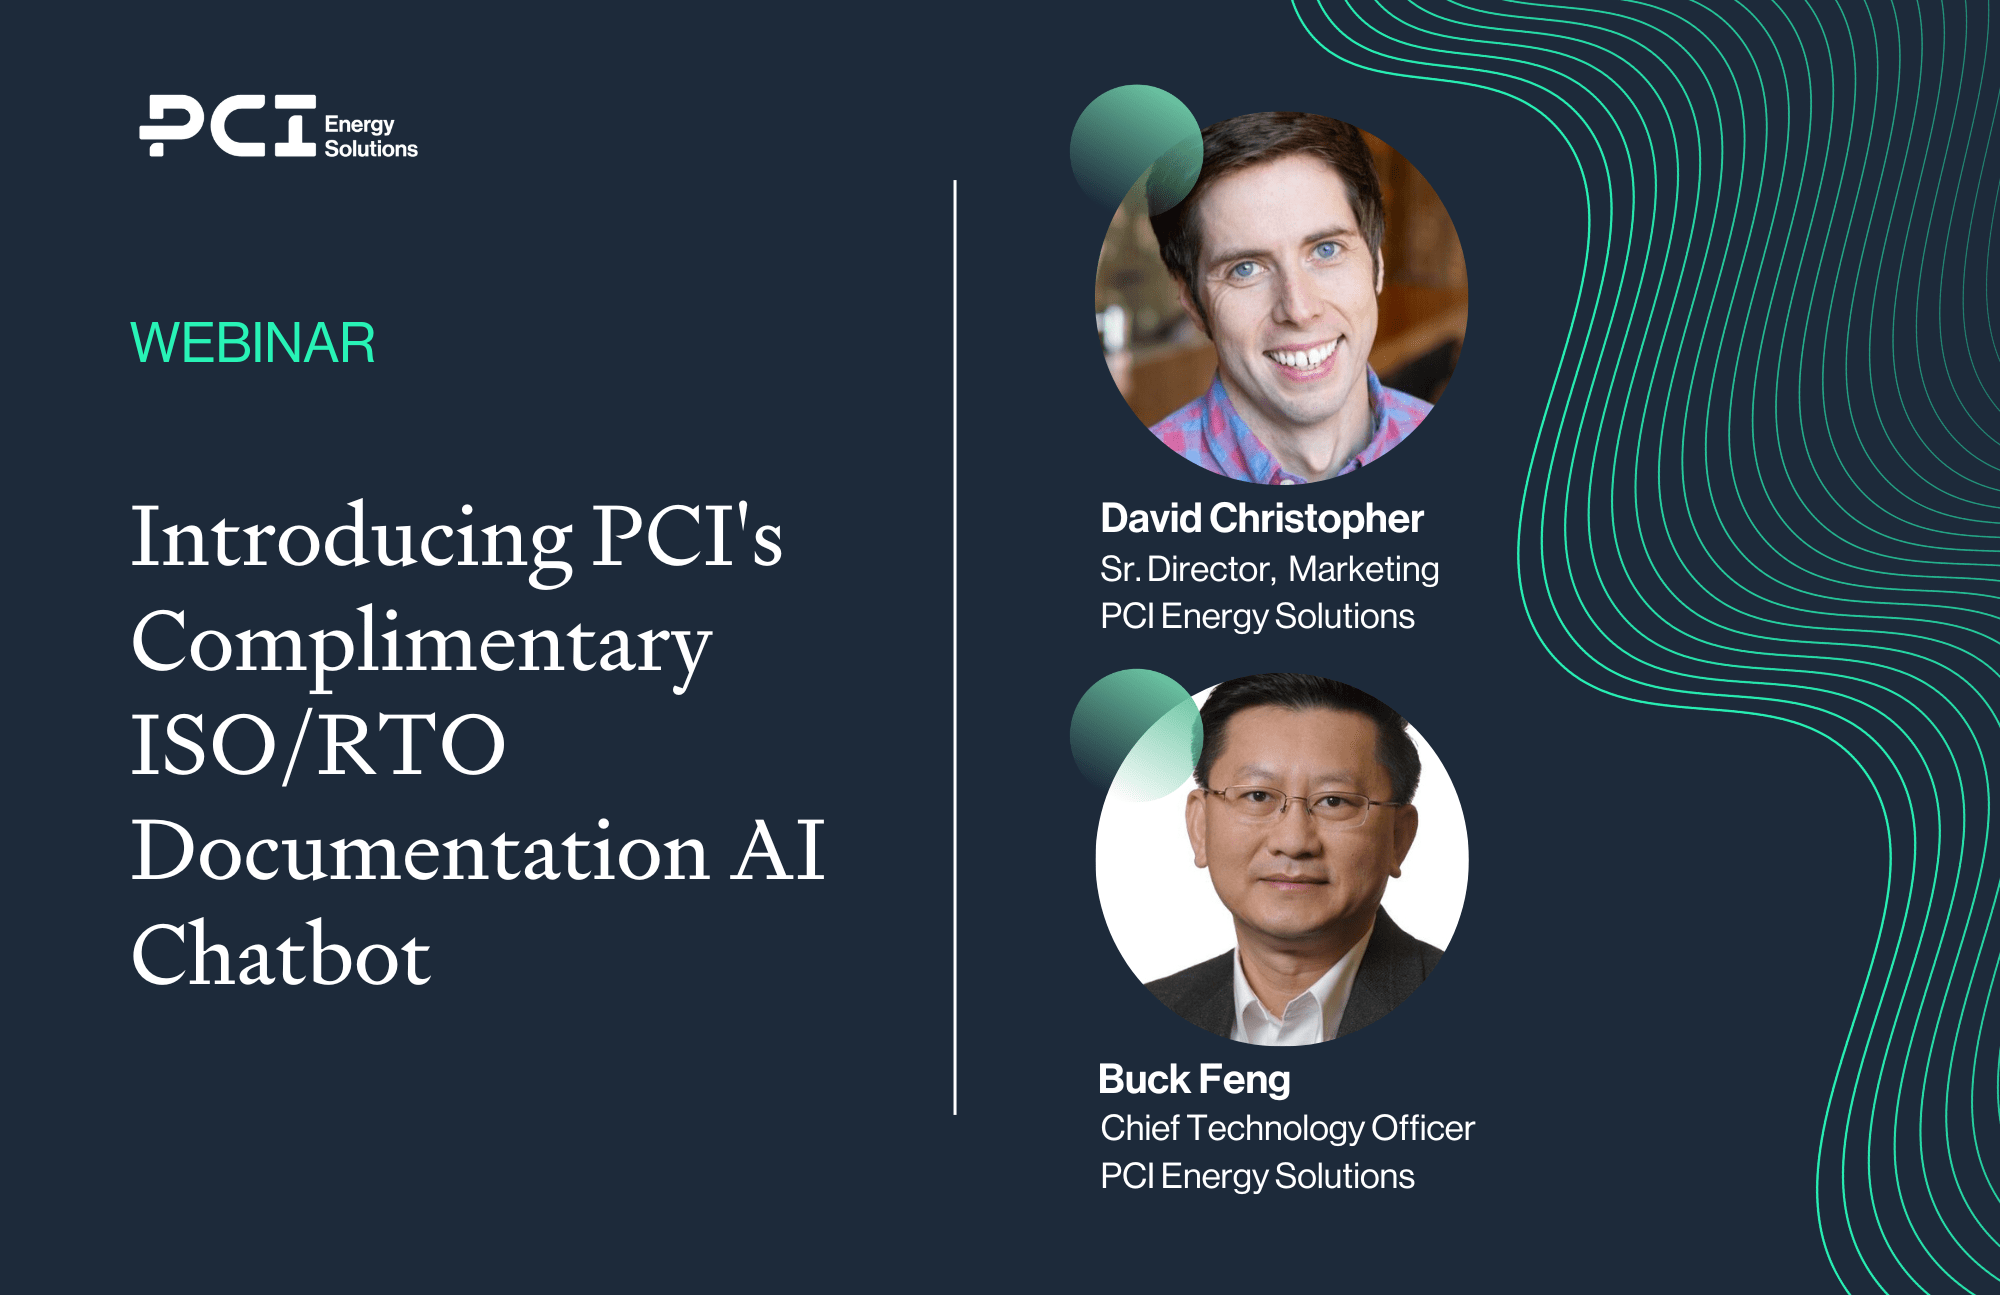 Introducing PCI’s Complimentary ISO/RTO Documentation AI Chatbot